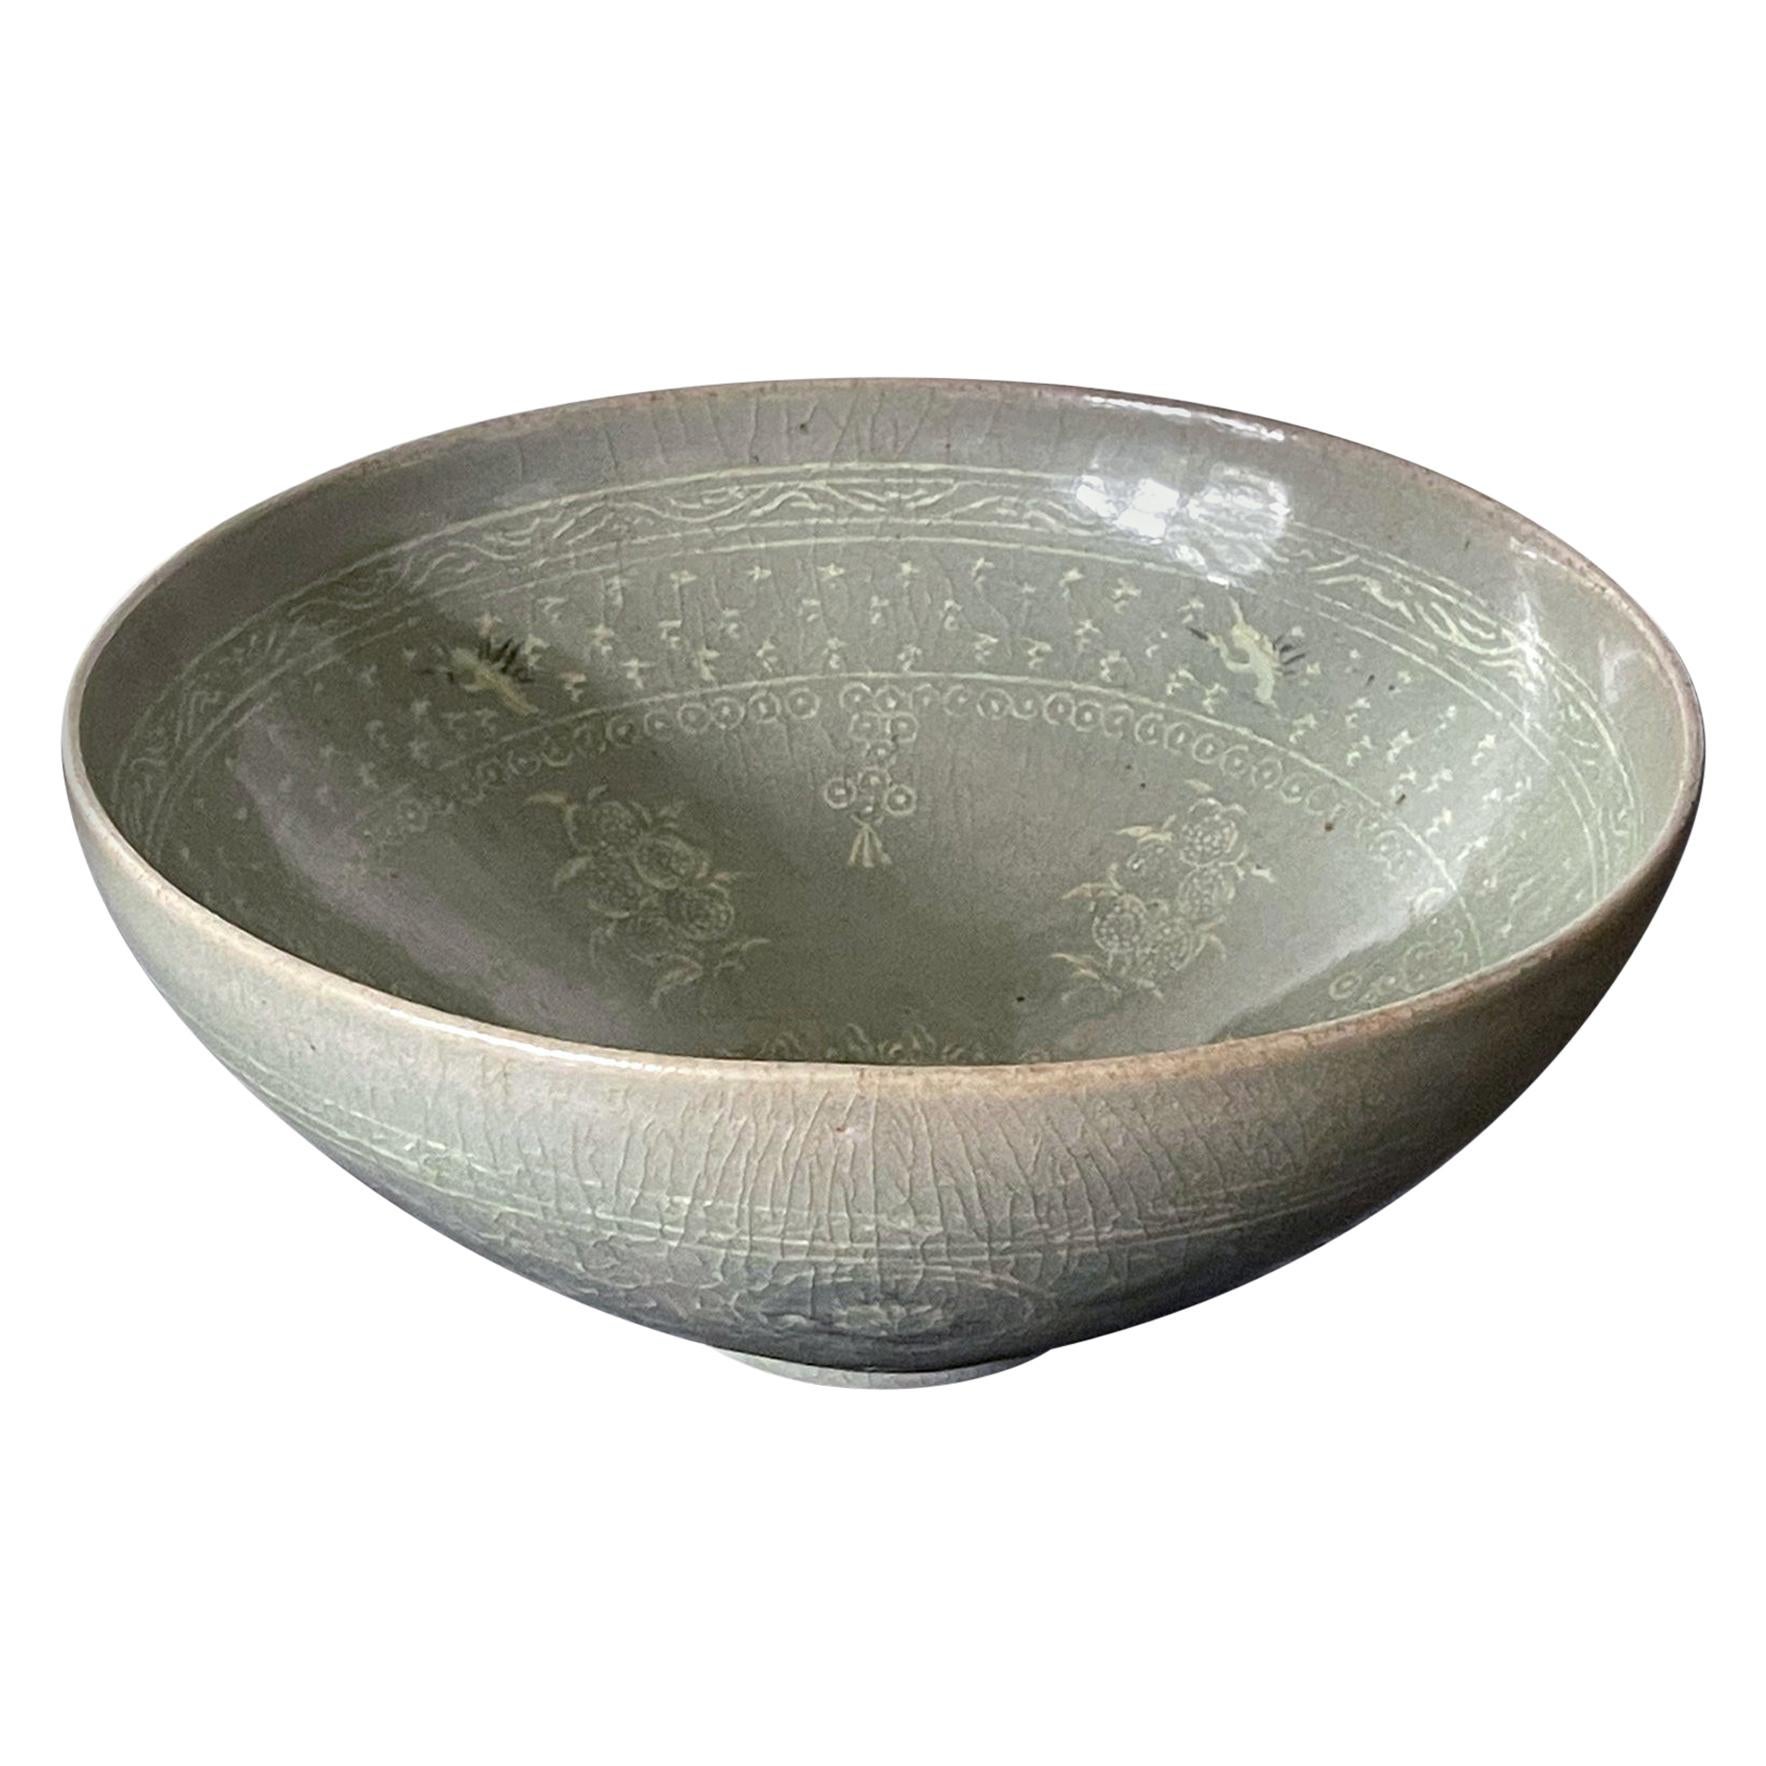 What did Koreans use celadon for?